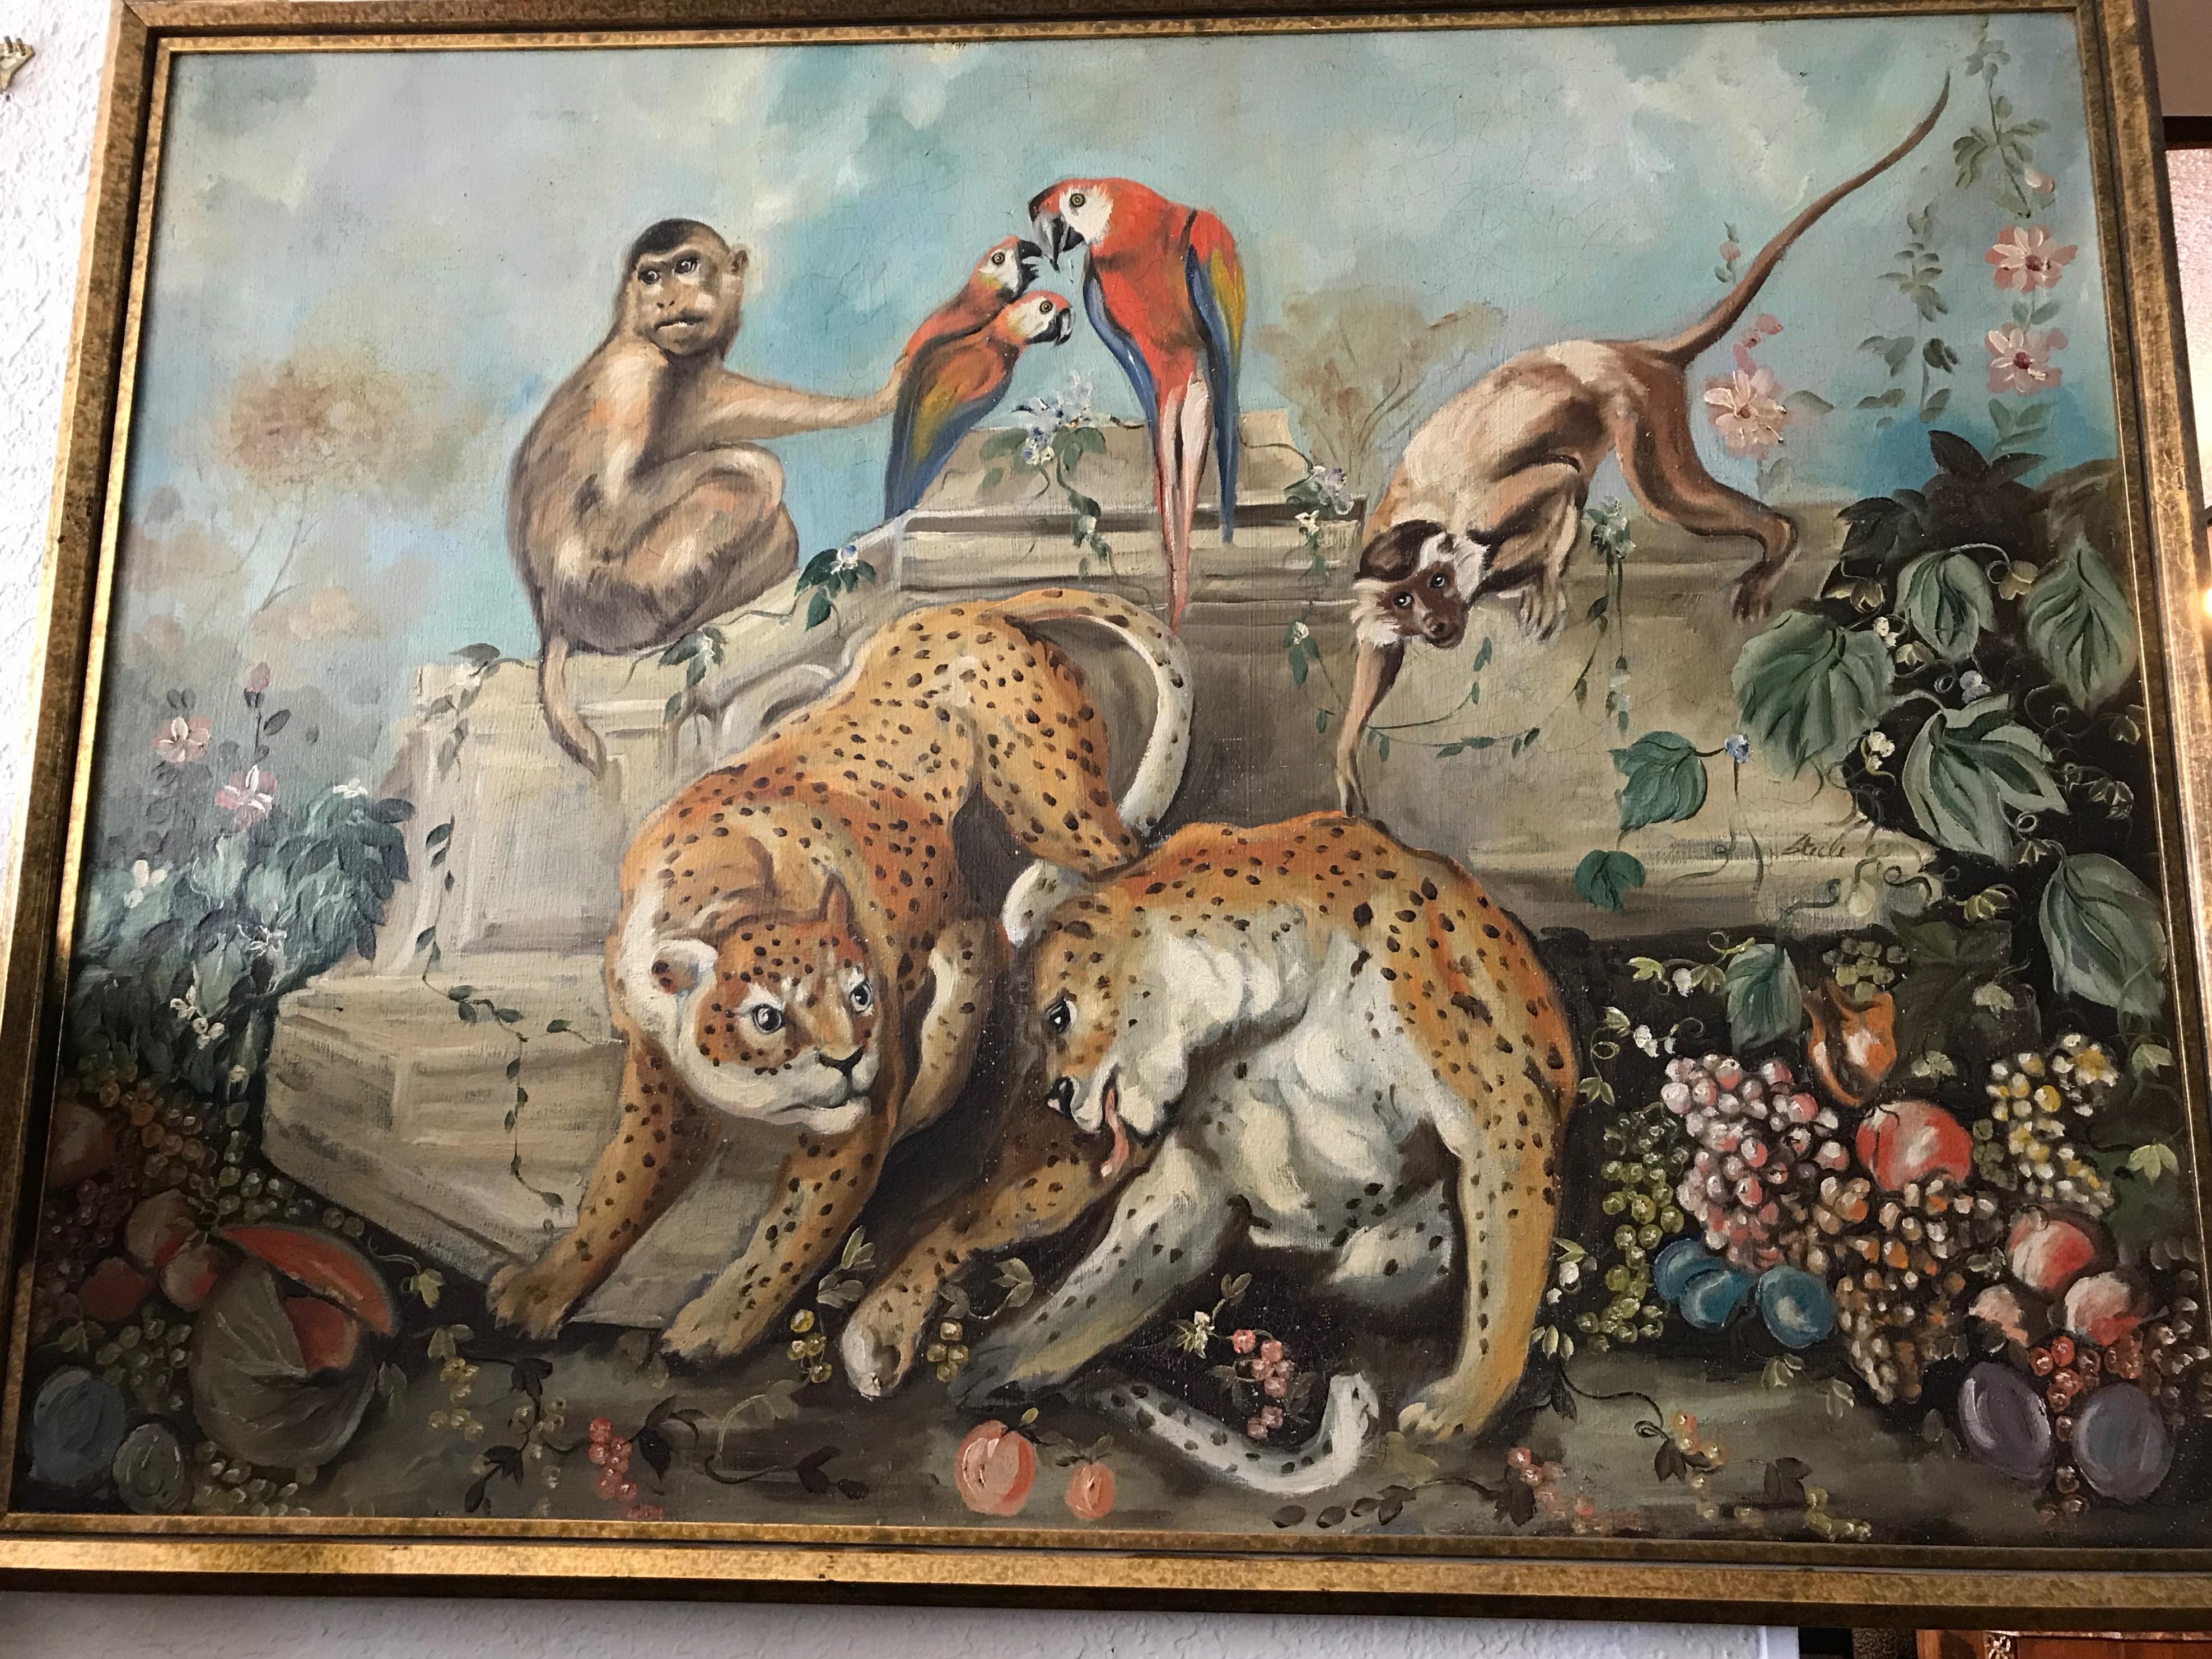 20th Century Whimsical Vintage Palm Beach Mural of Twin Leopards